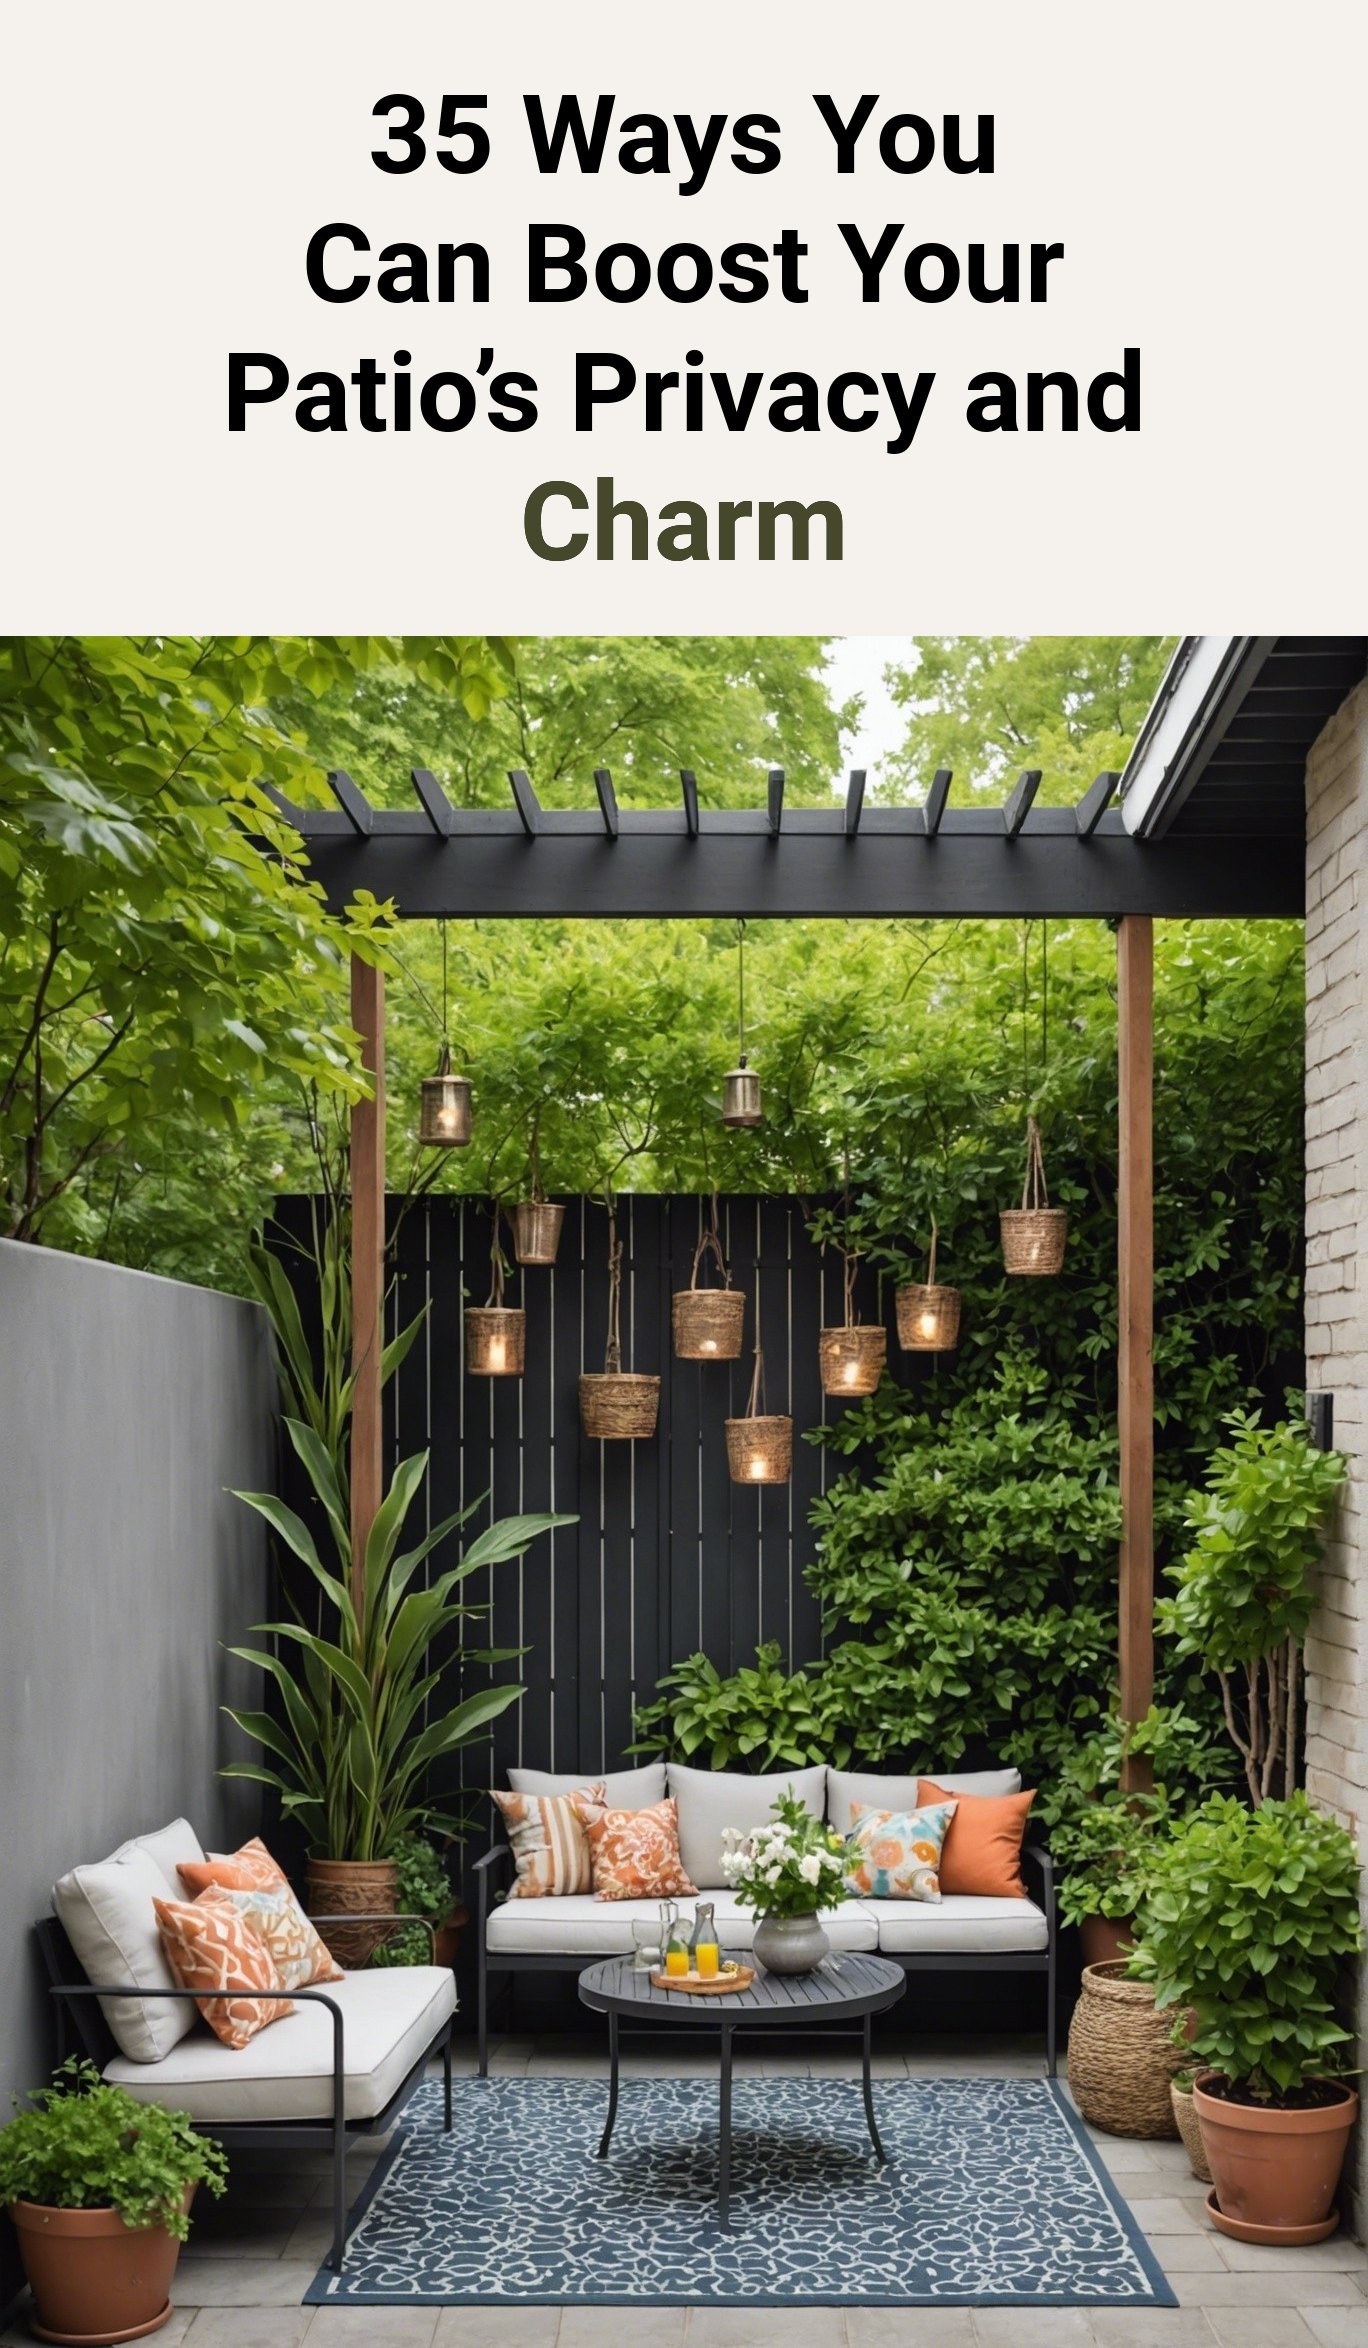 35 Ways You Can Boost Your Patio’s Privacy and Charm